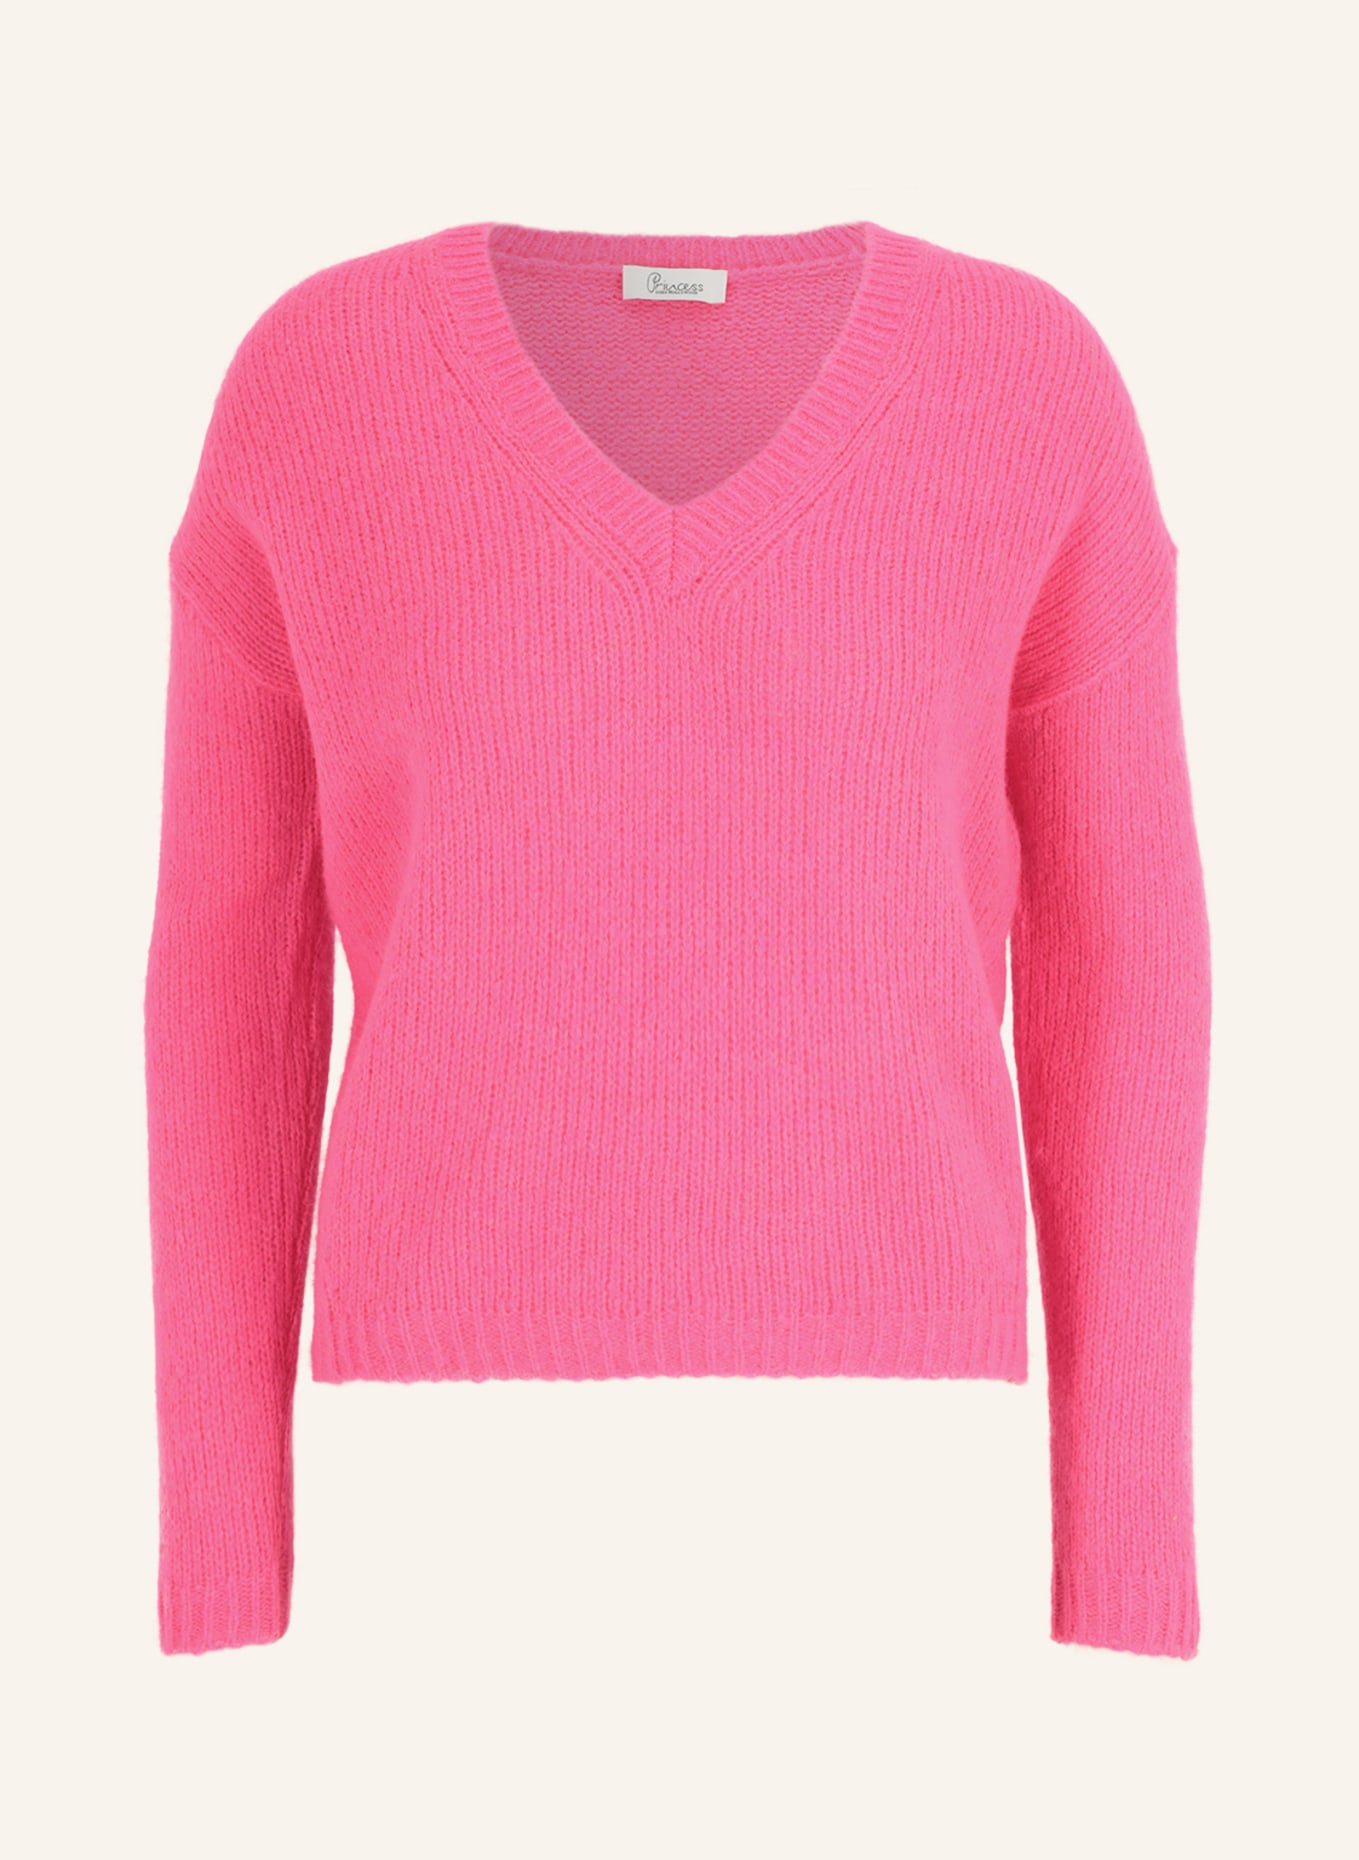 Princess GOES HOLLYWOOD Pullover mit Merinowolle, Farbe: PINK (Bild 1)